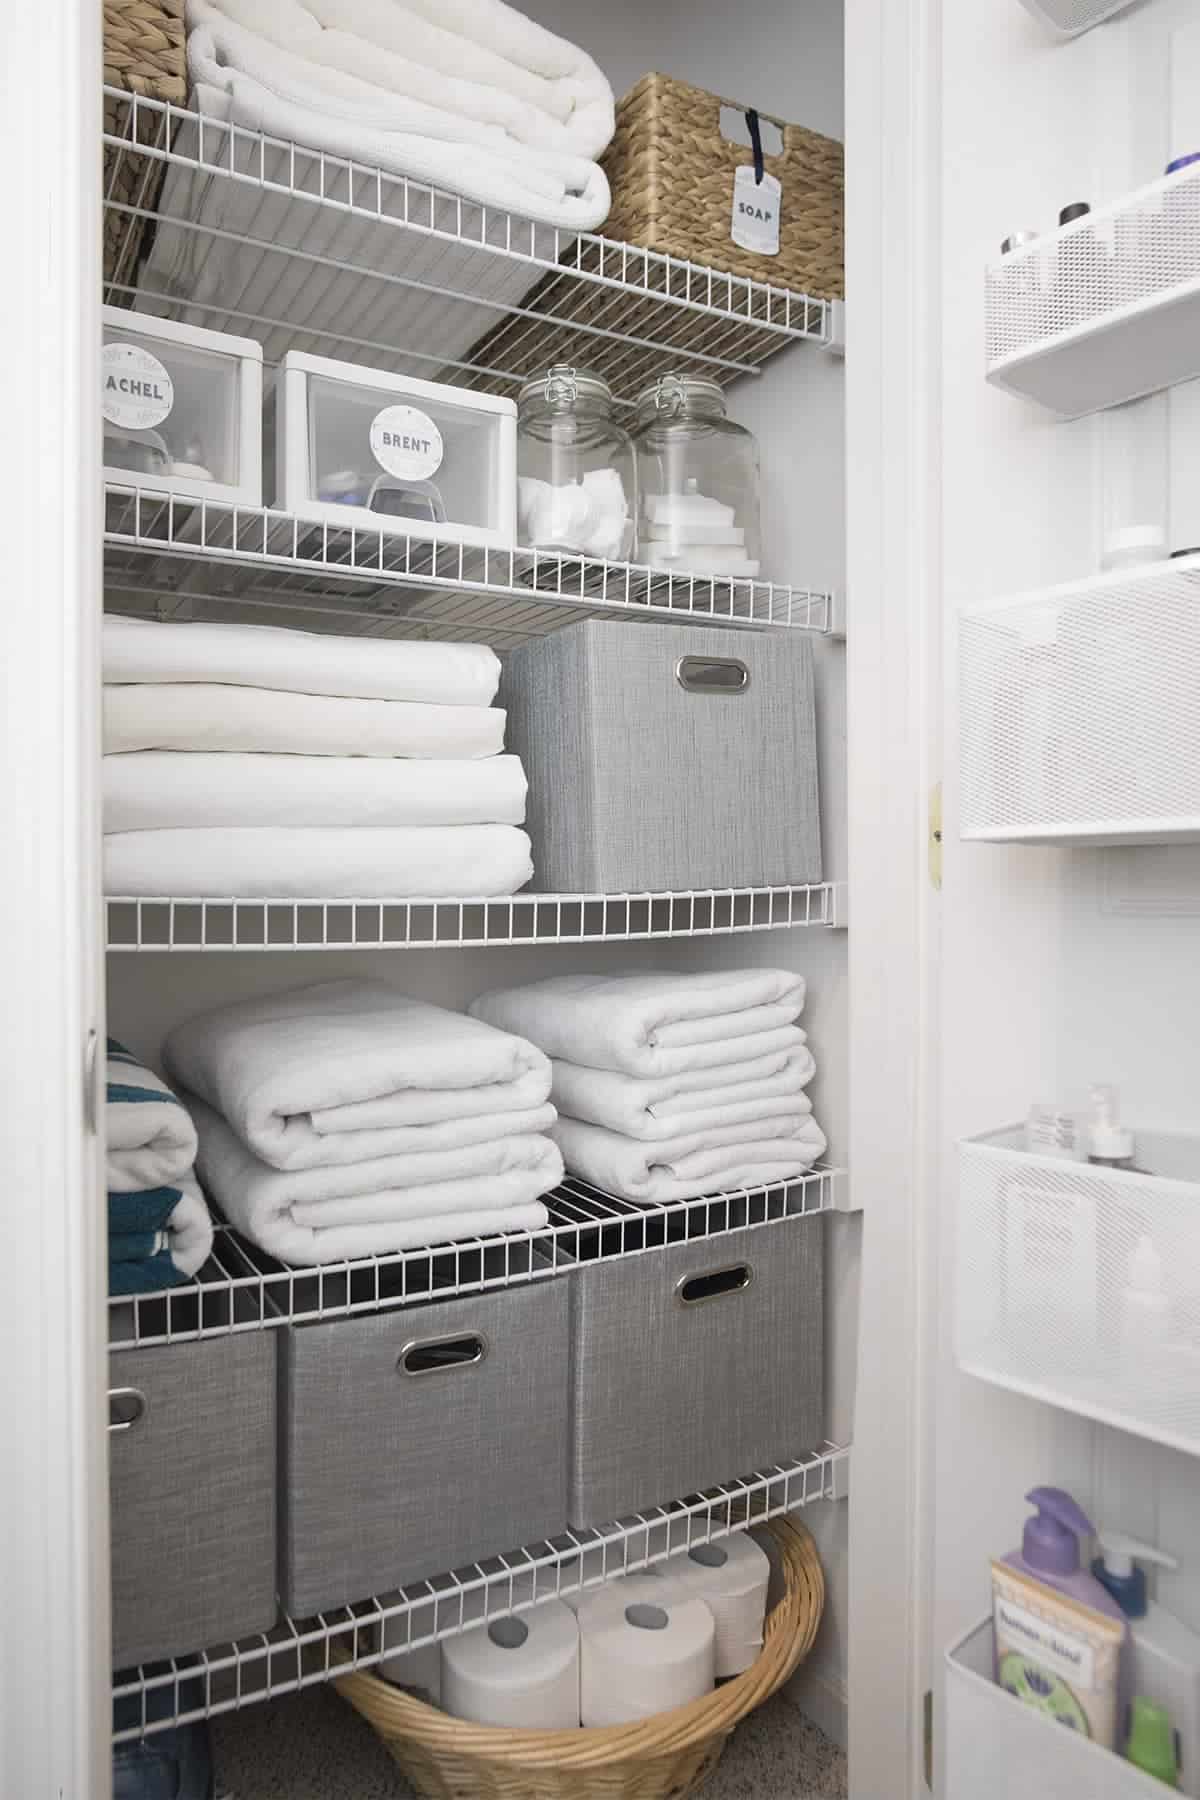 Organized linen closet with bins and baskets and over the door organizer. White & gray hues.